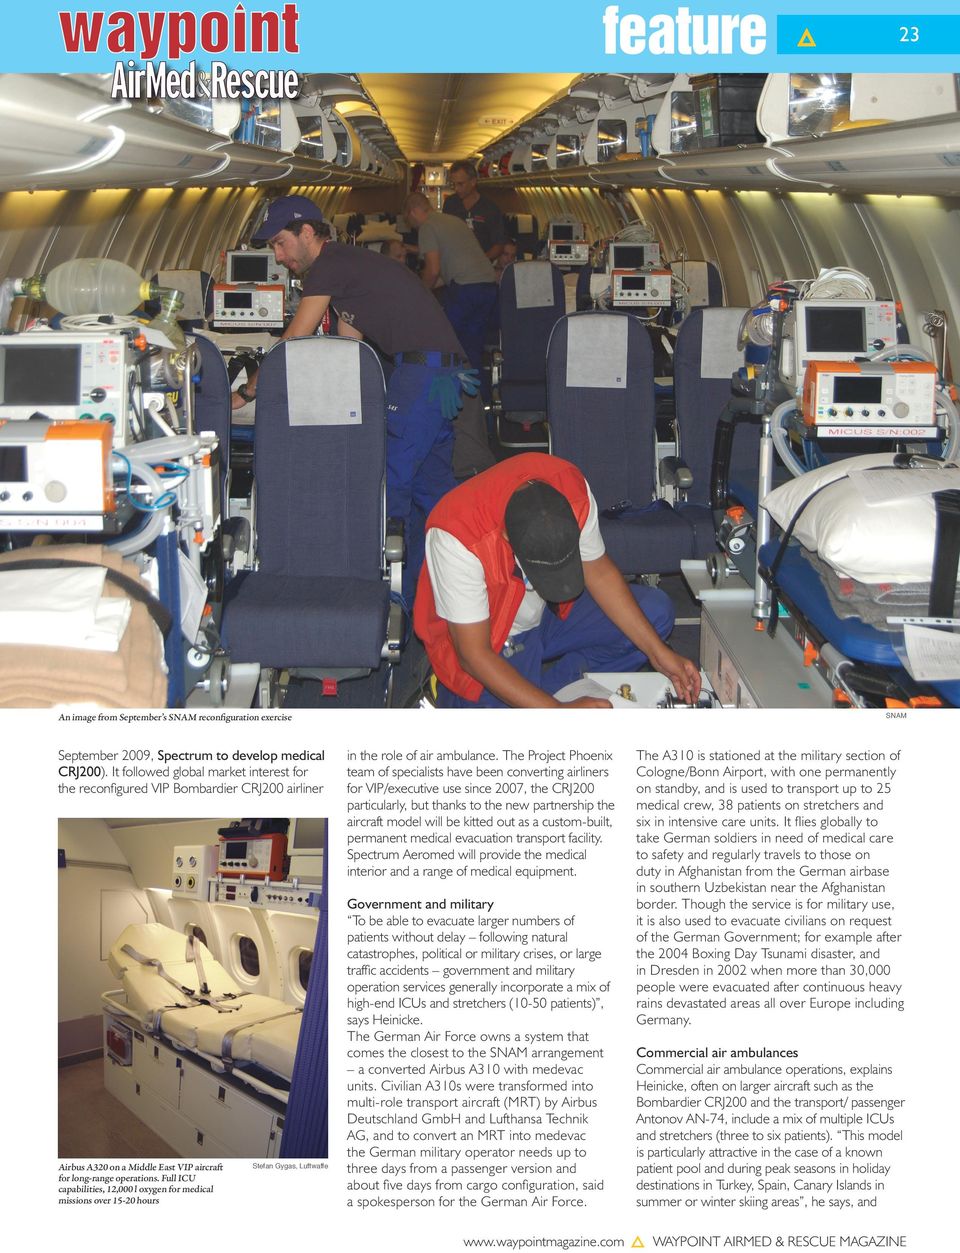 Full ICU capabilities, 12,000 l oxygen for medical missions over 15-20 hours in the role of air ambulance.